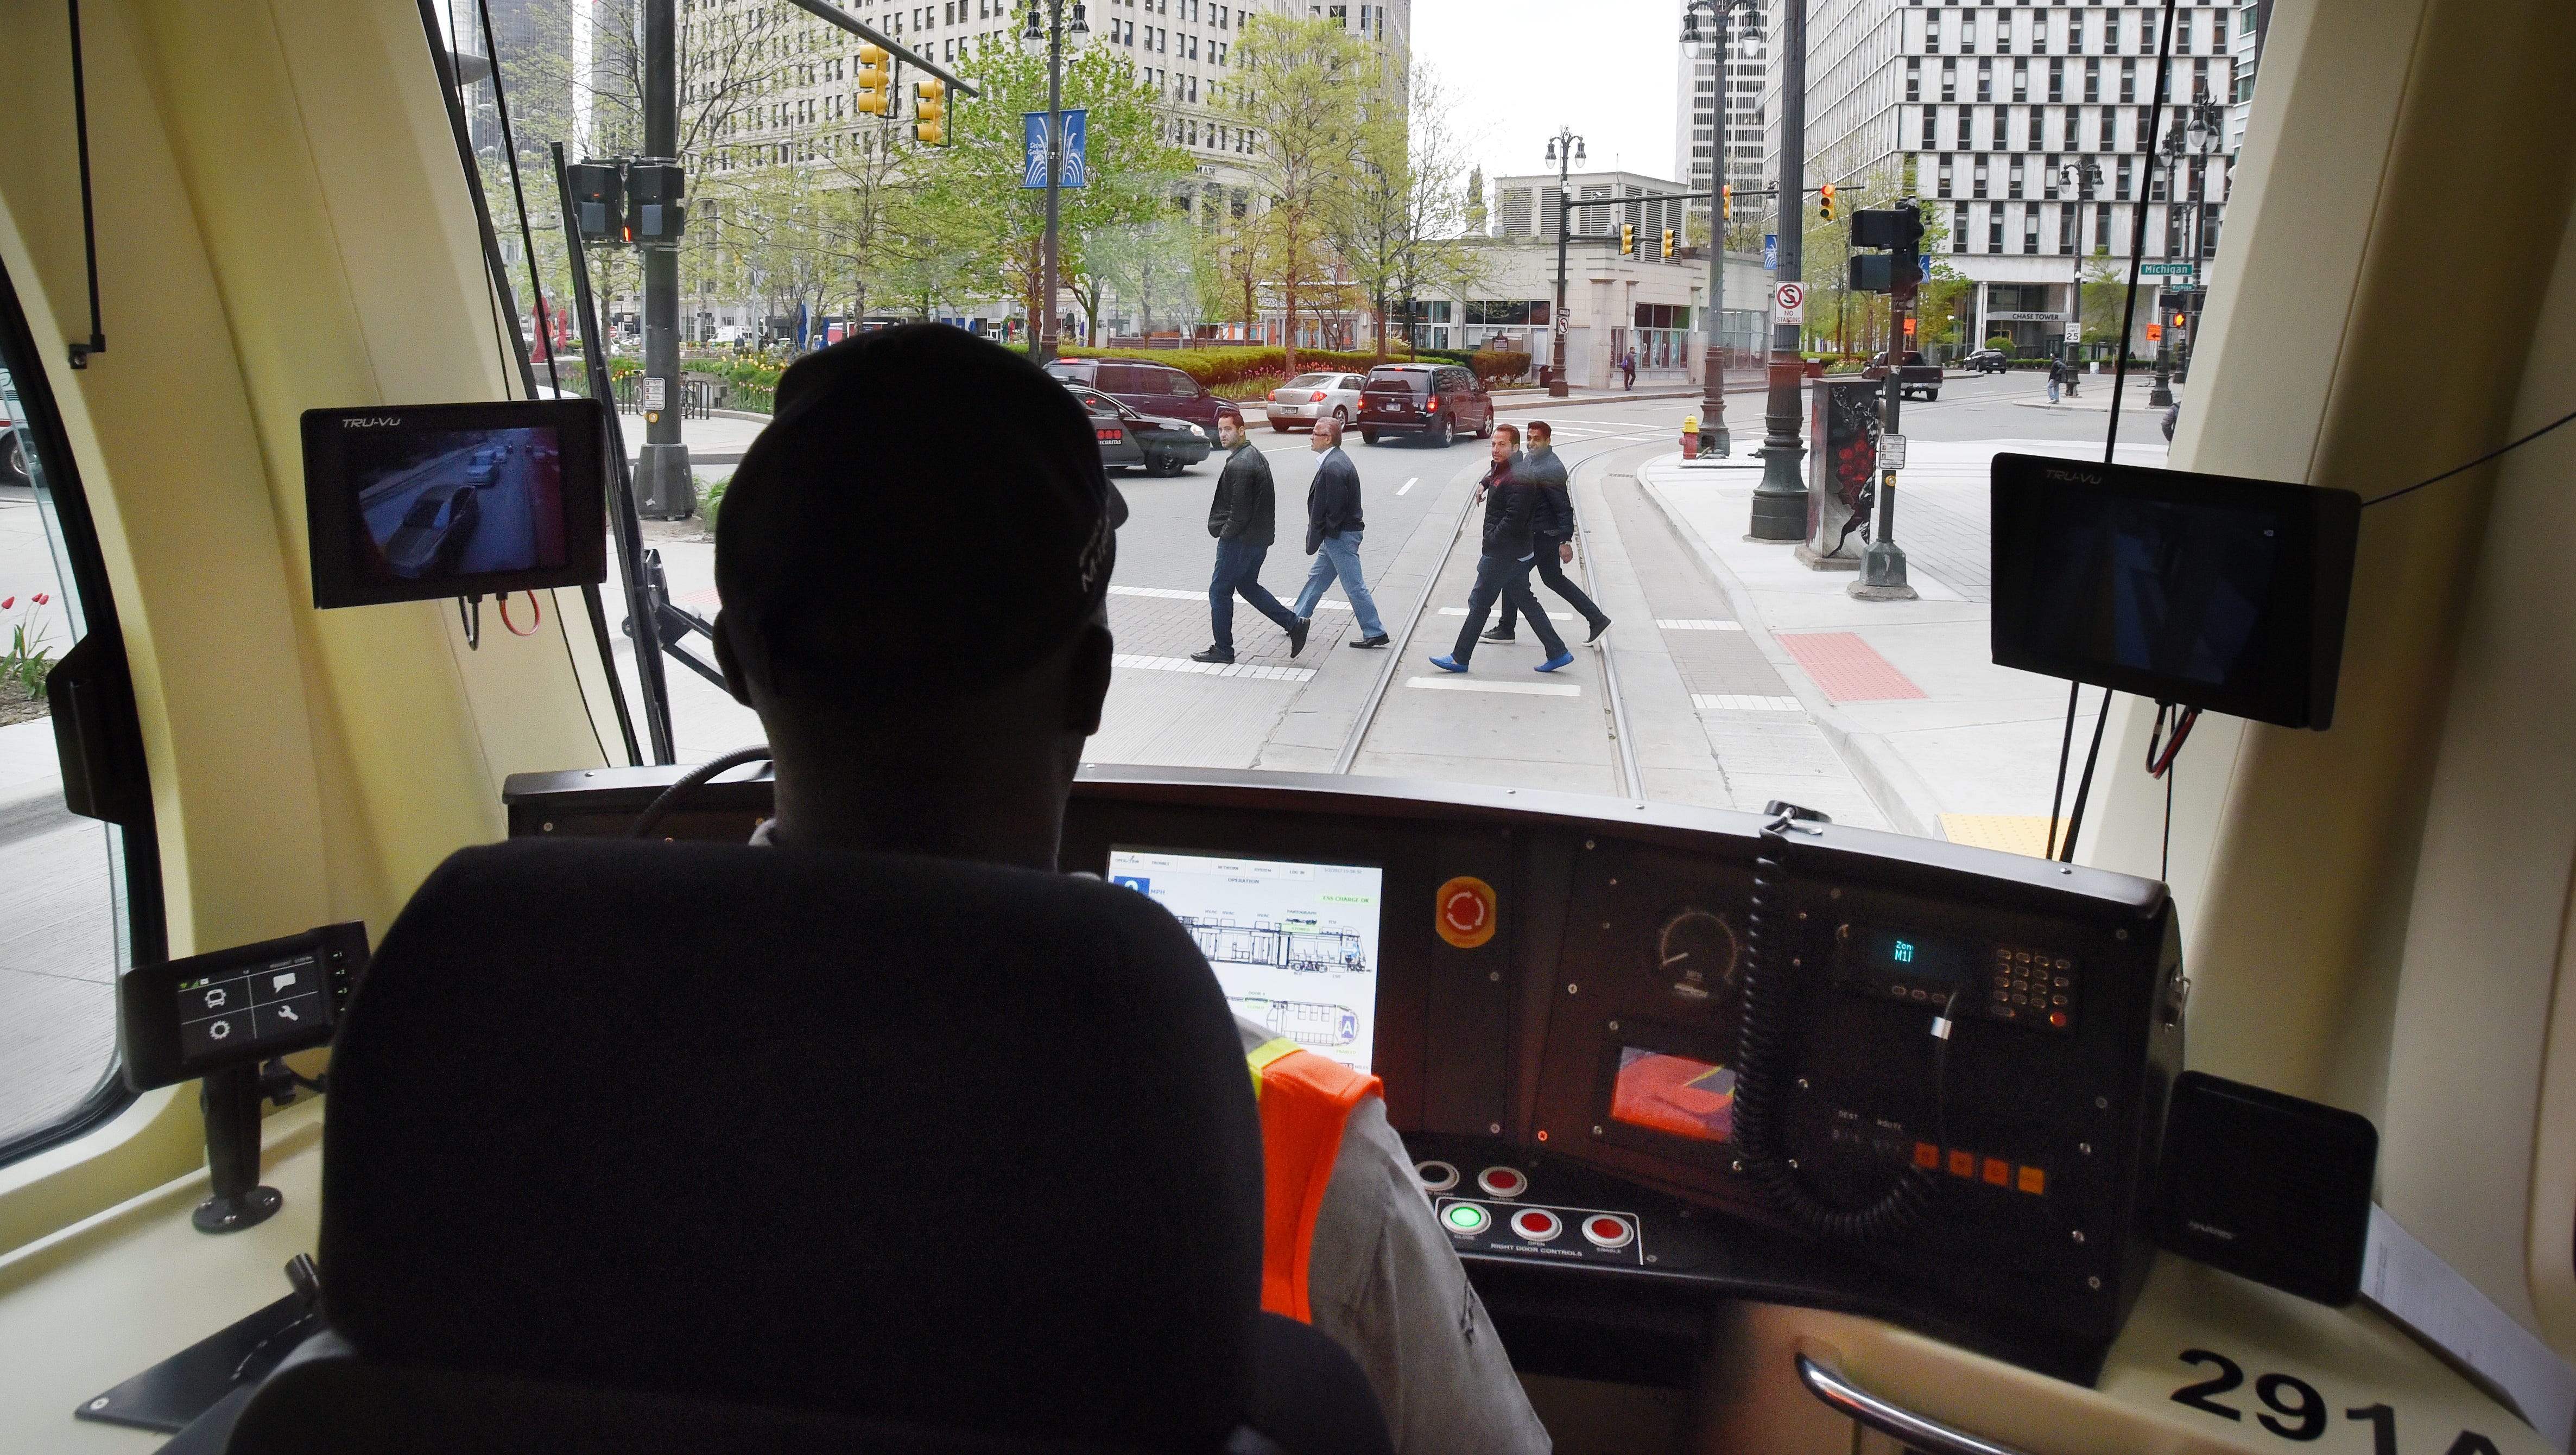 QLine streetcar operator Marcus Stewart waits at the light as he makes his way south down Woodward in the Campus Martius area.